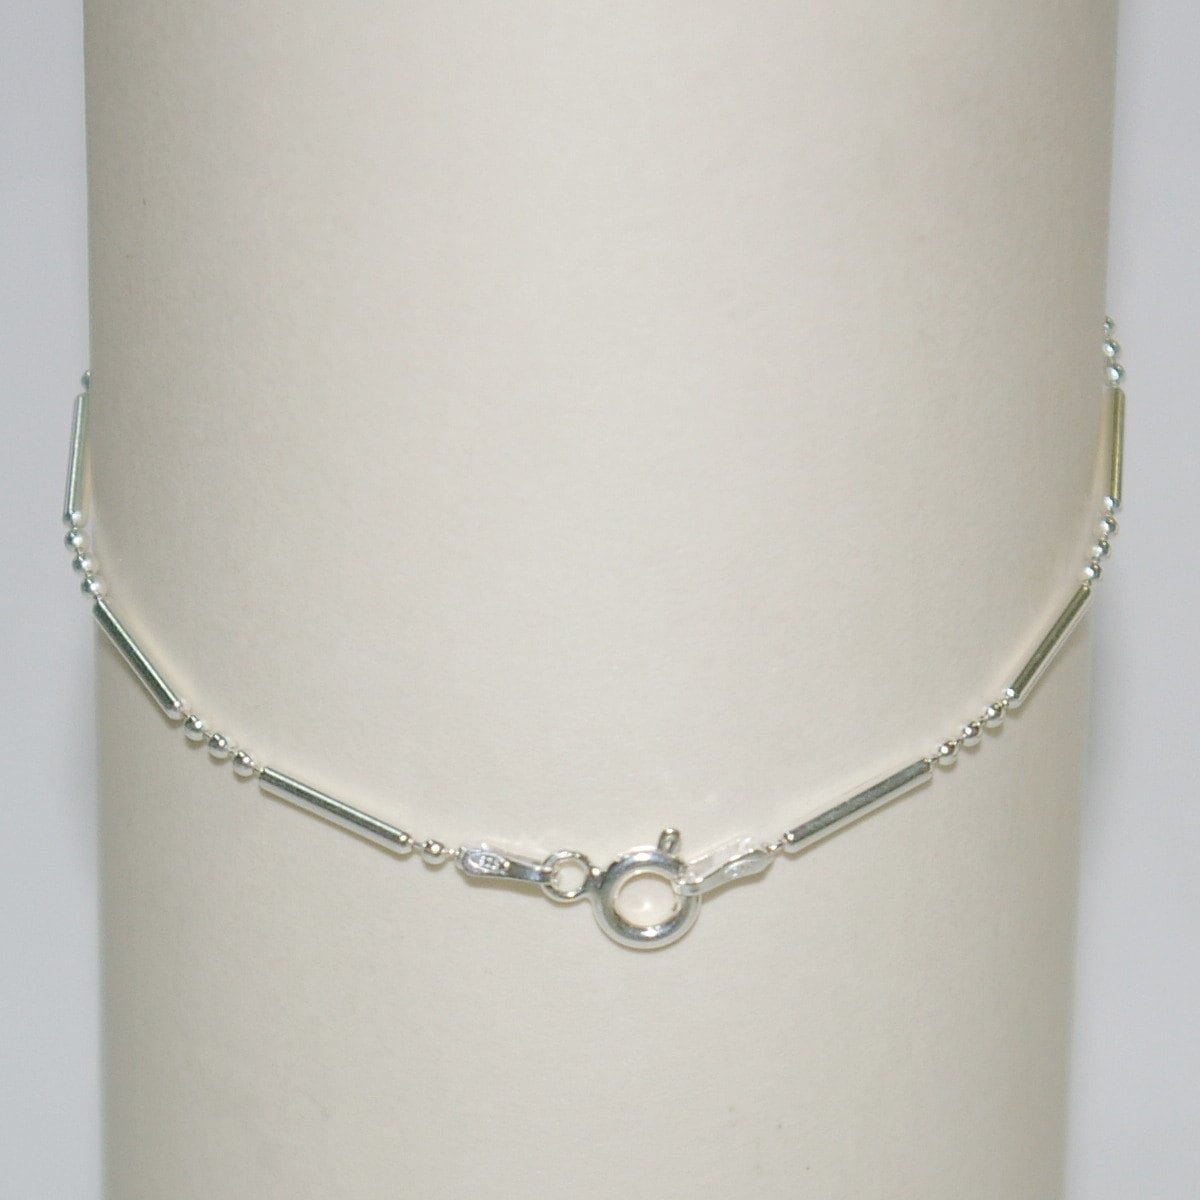 10" Free Gift Packaging Sterling Silver Bar And Bead Chain Ankle Bracelet 9"